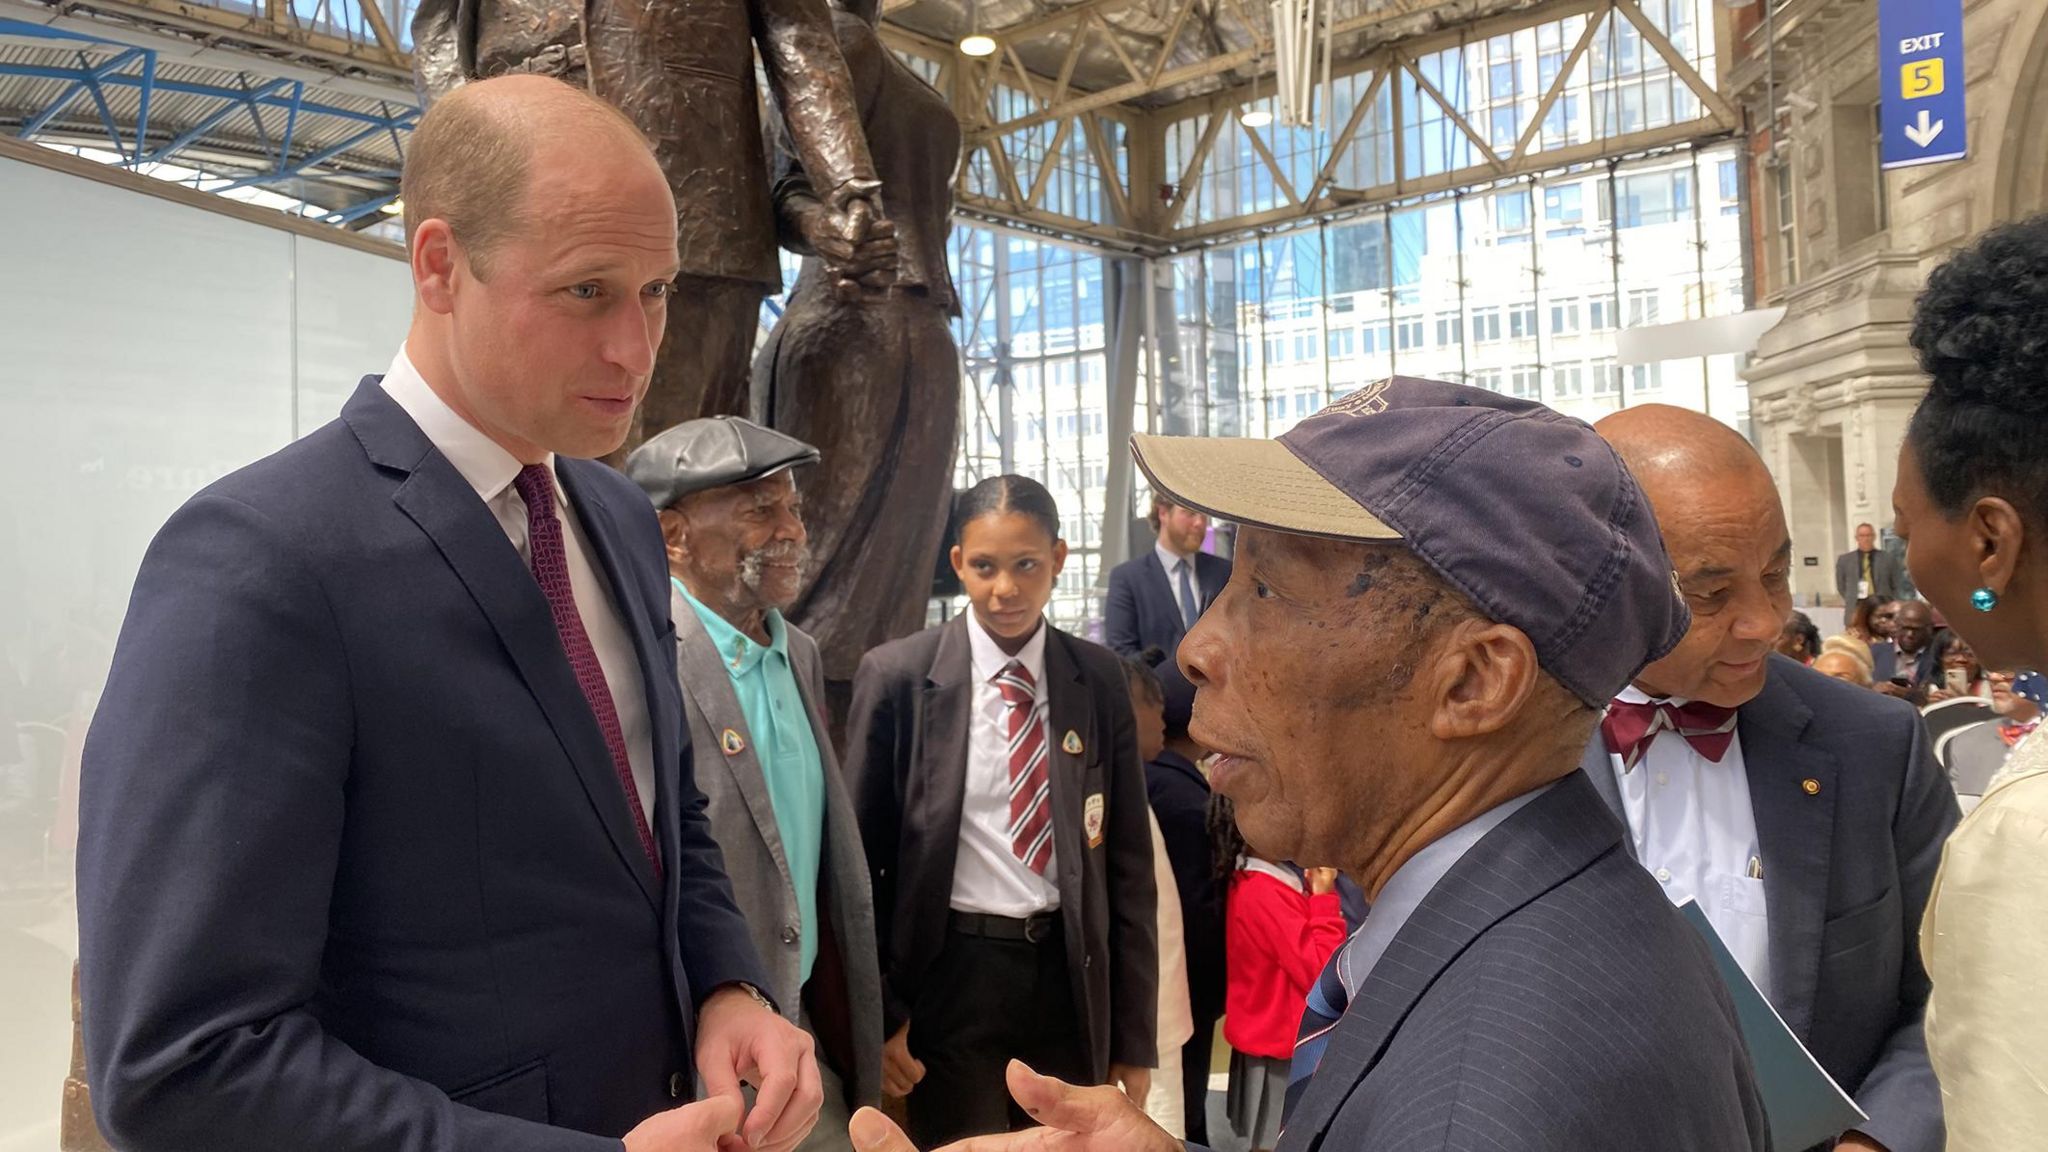 Siggy Cragwell meeting Prince William